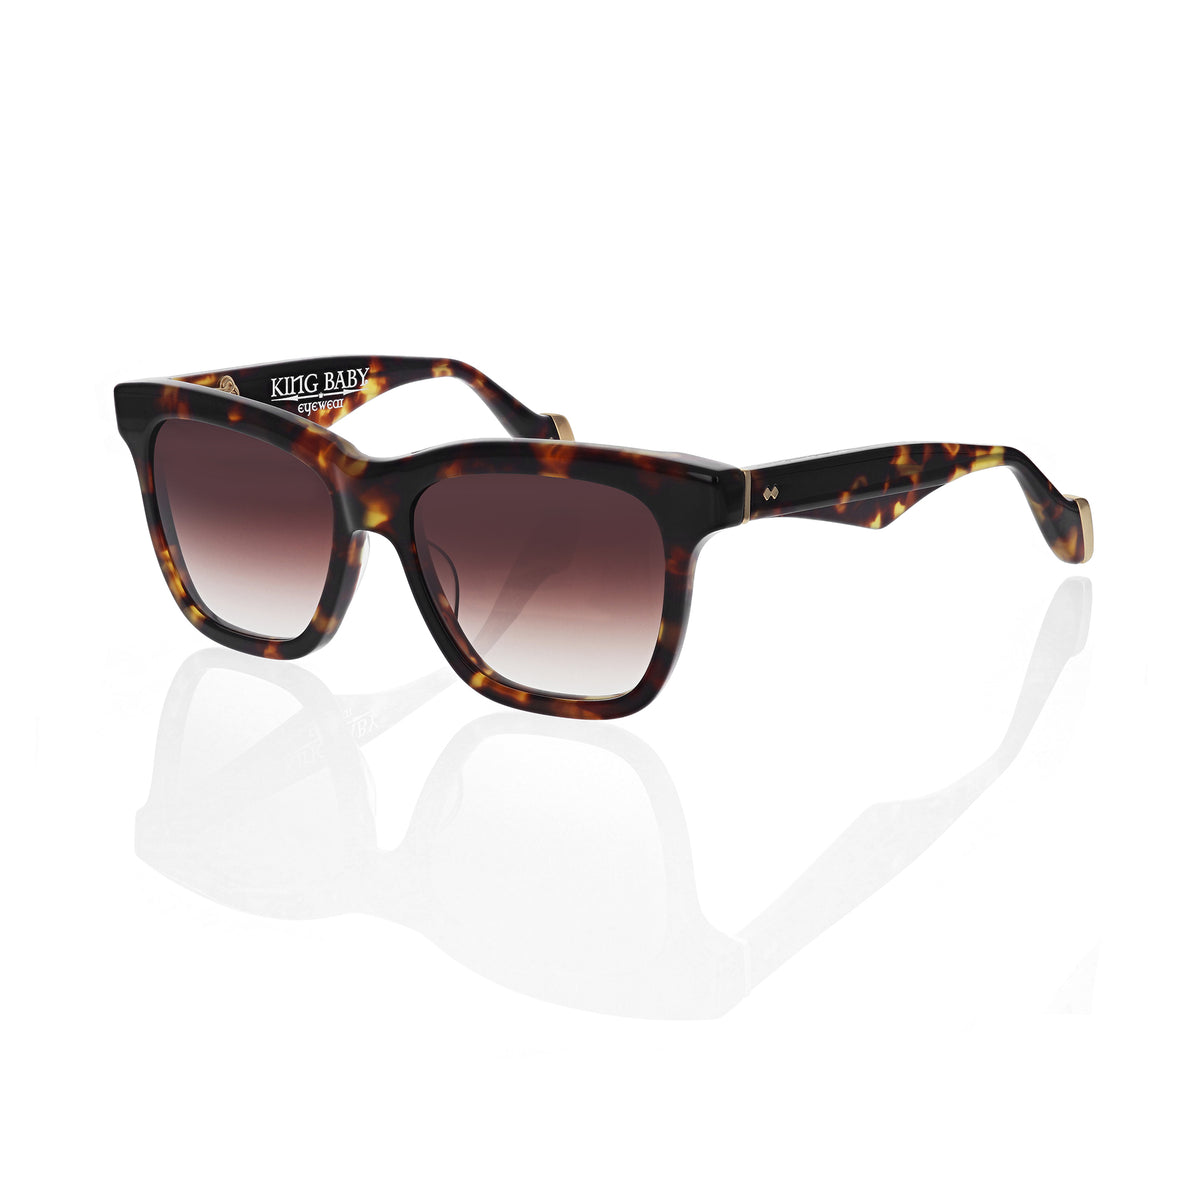 The Las Vegas Sunglasses | Brown - Available for Immediate Ship - King Baby Studio